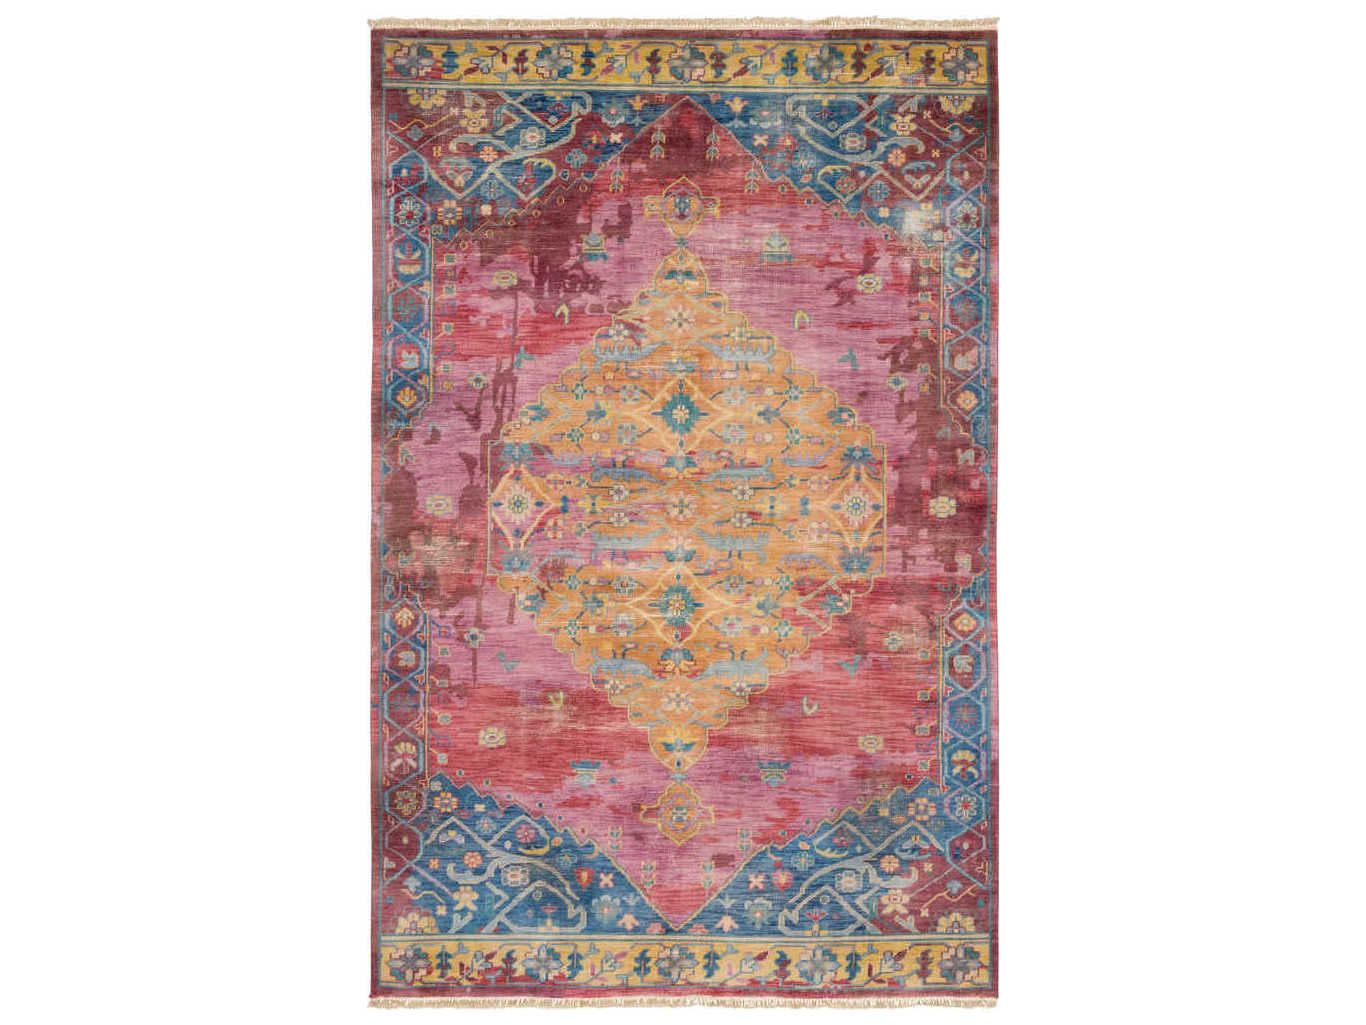 Surya Festival Mauve Dark Purple Red, Teal And Red Area Rug